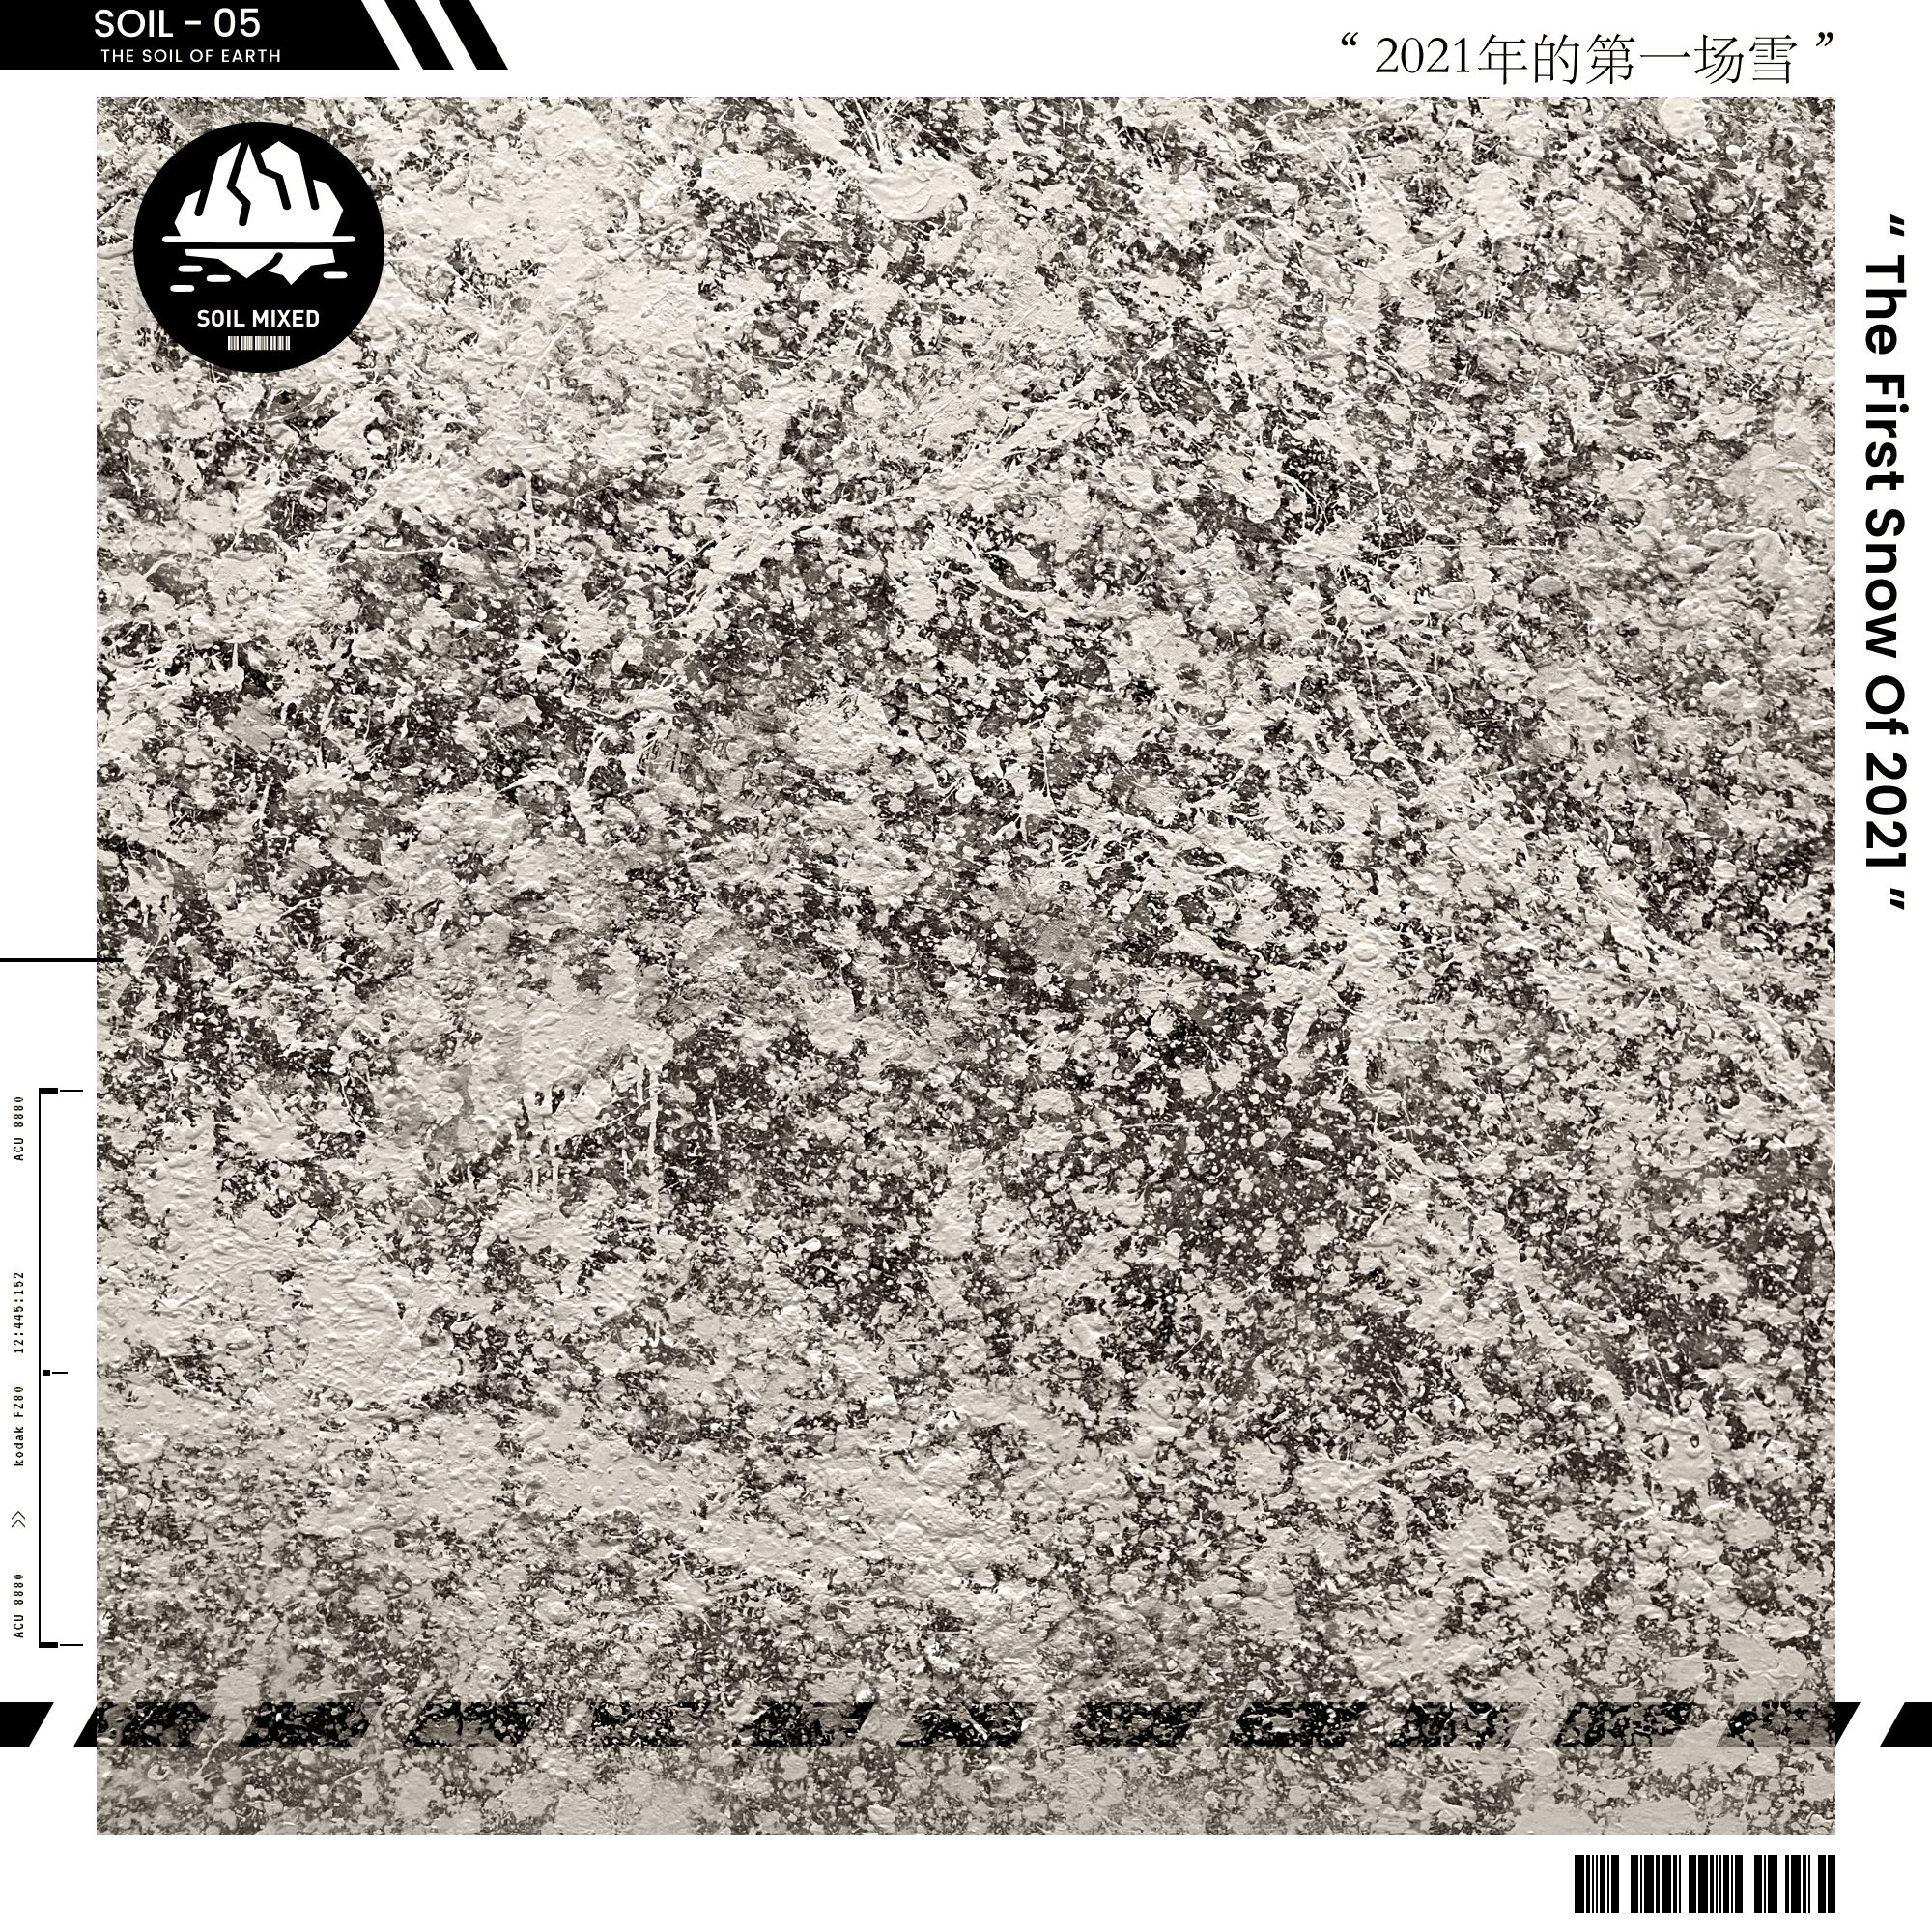 SOIL - 05 “ The First Snow Of 2021 ”